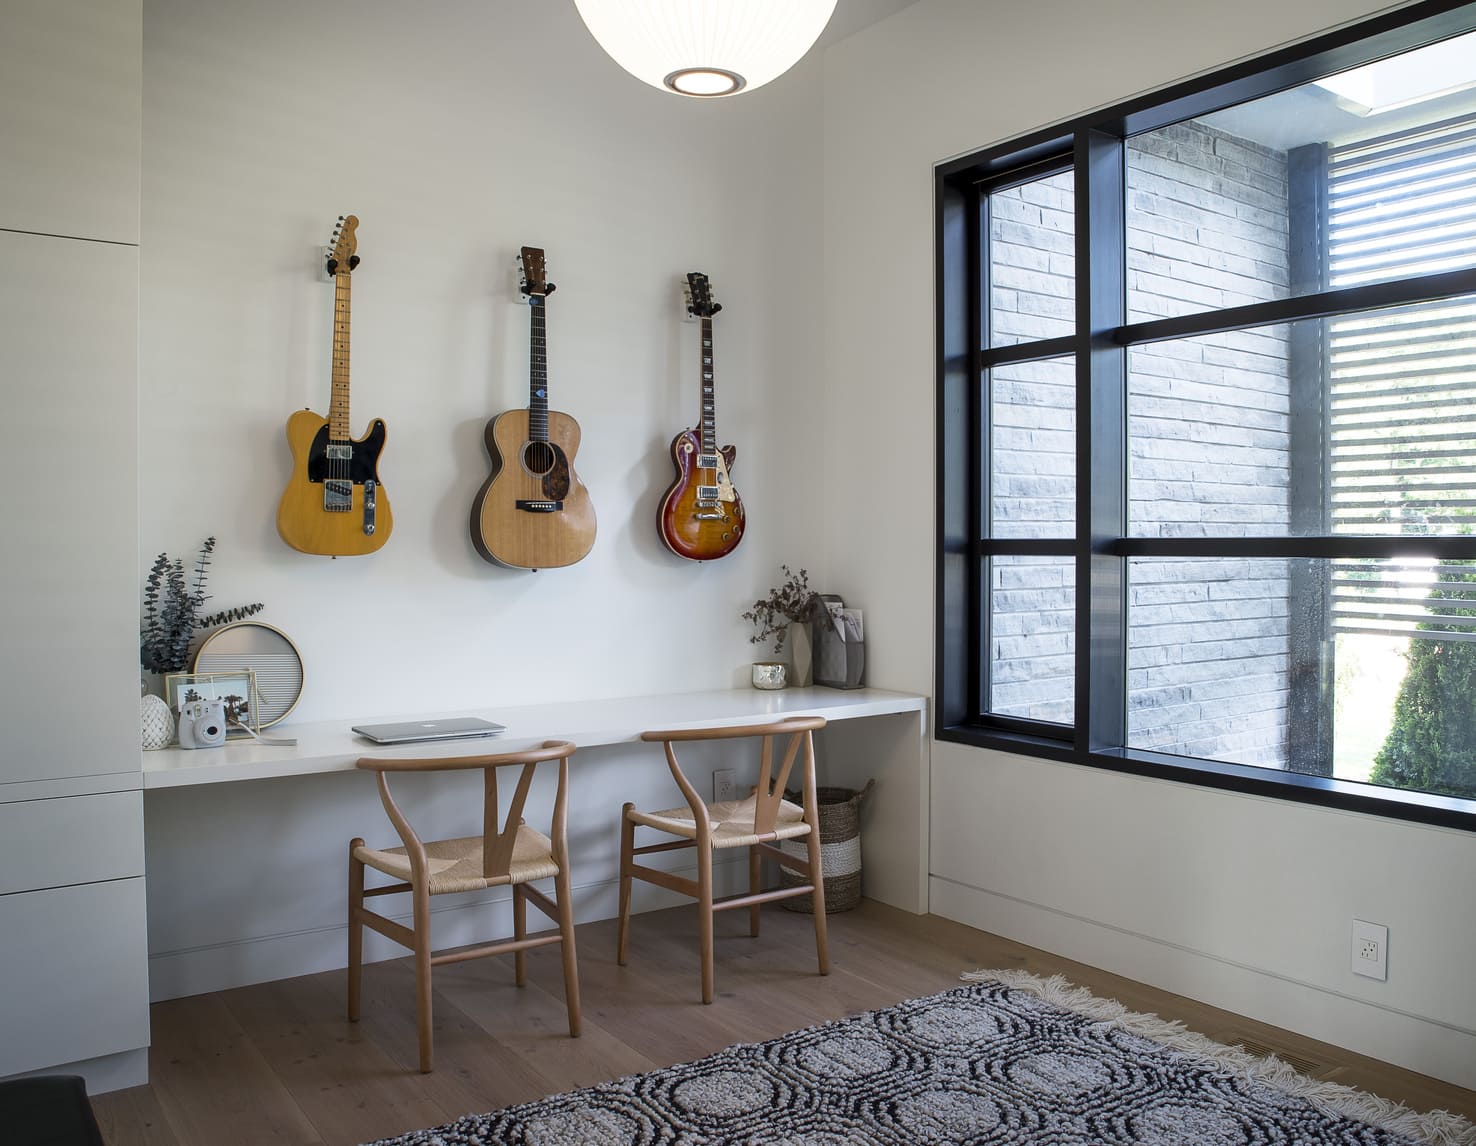 Three guitars strung on the wall beside a stunning window view.